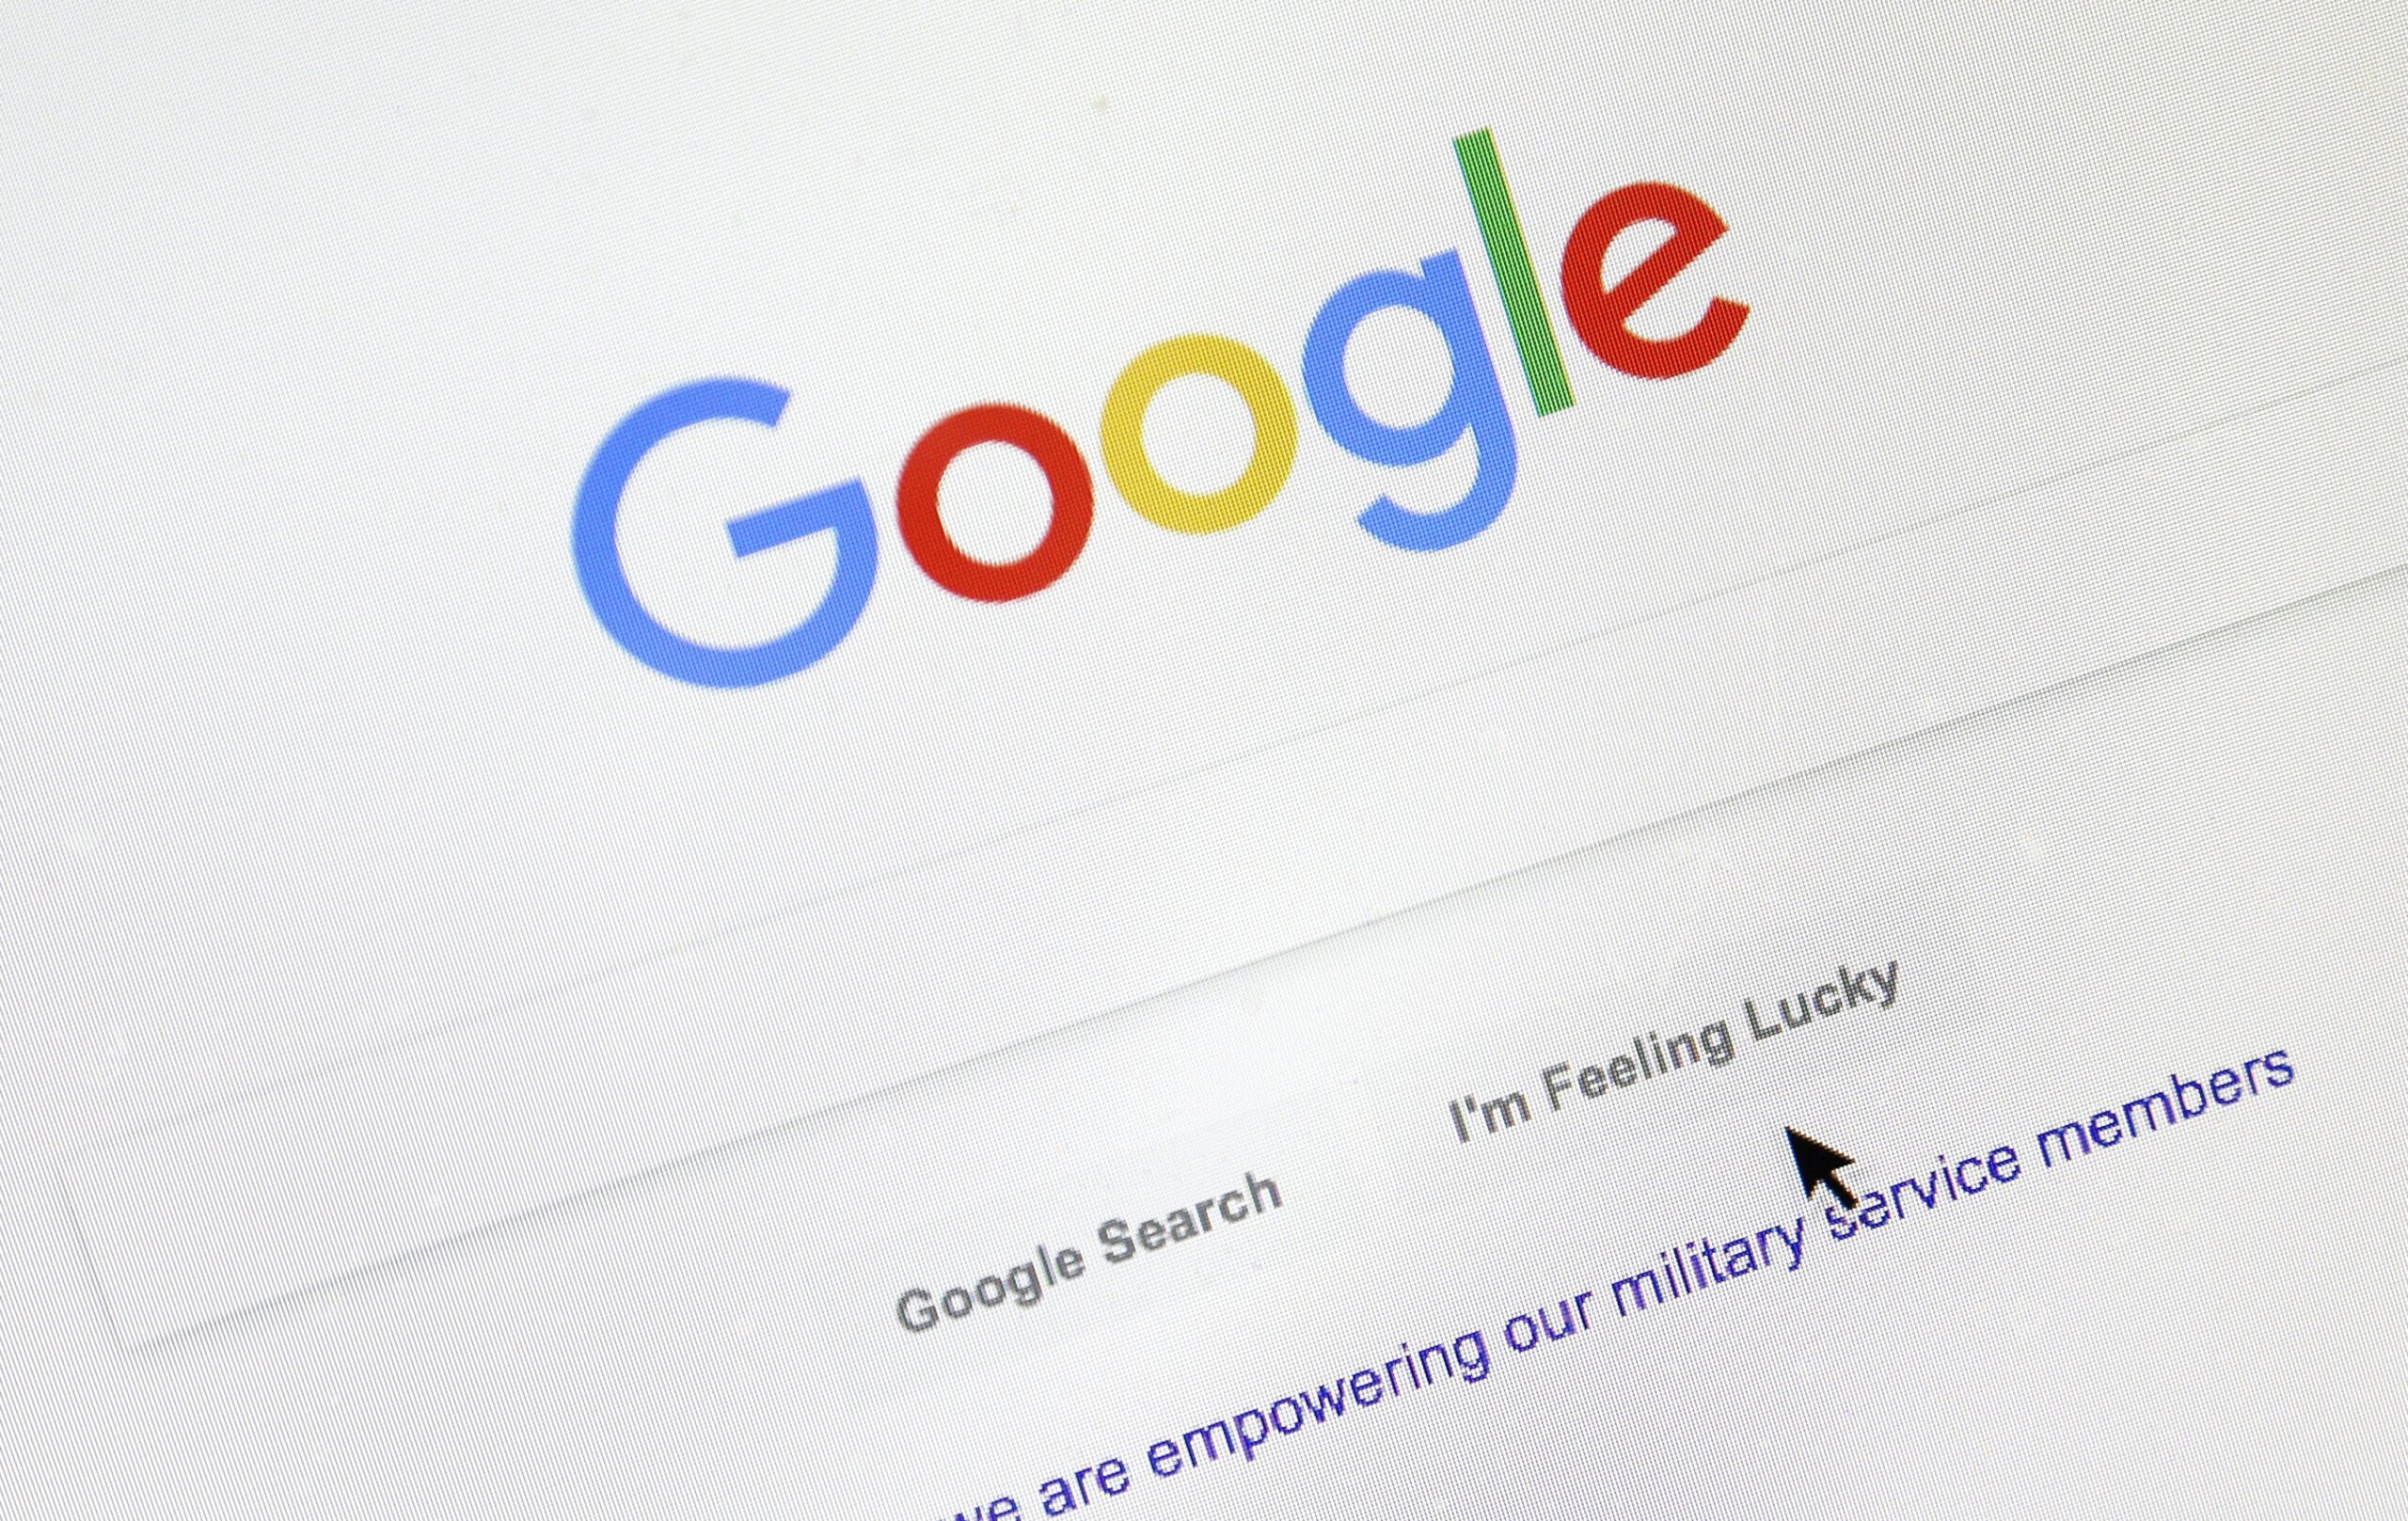 Data Doctors: How to examine Google’s search sources